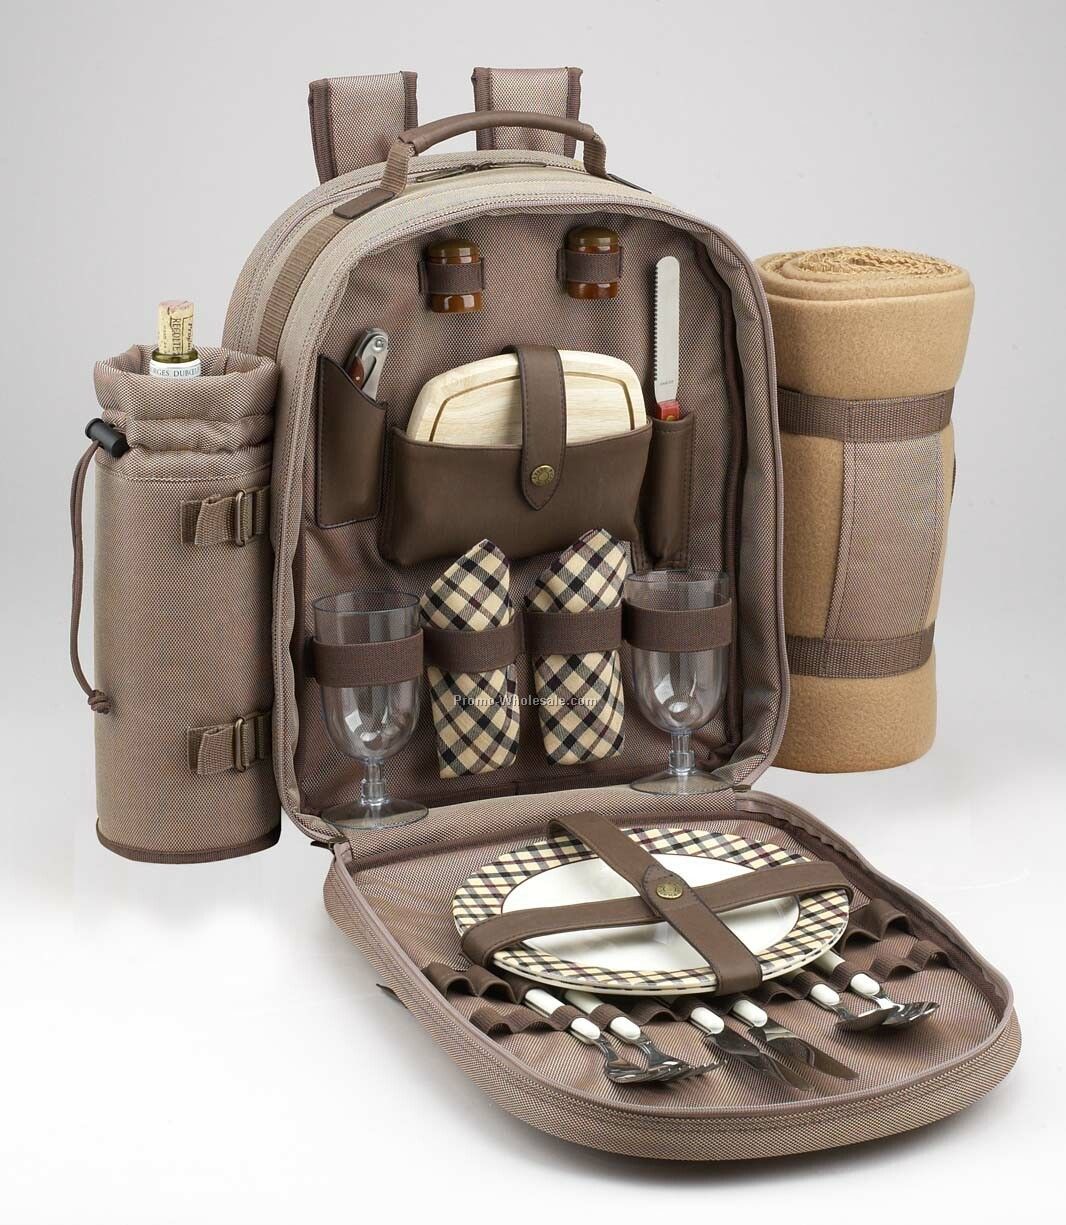 15"x16"x6.5" Picnic Backpack With Blanket For Two